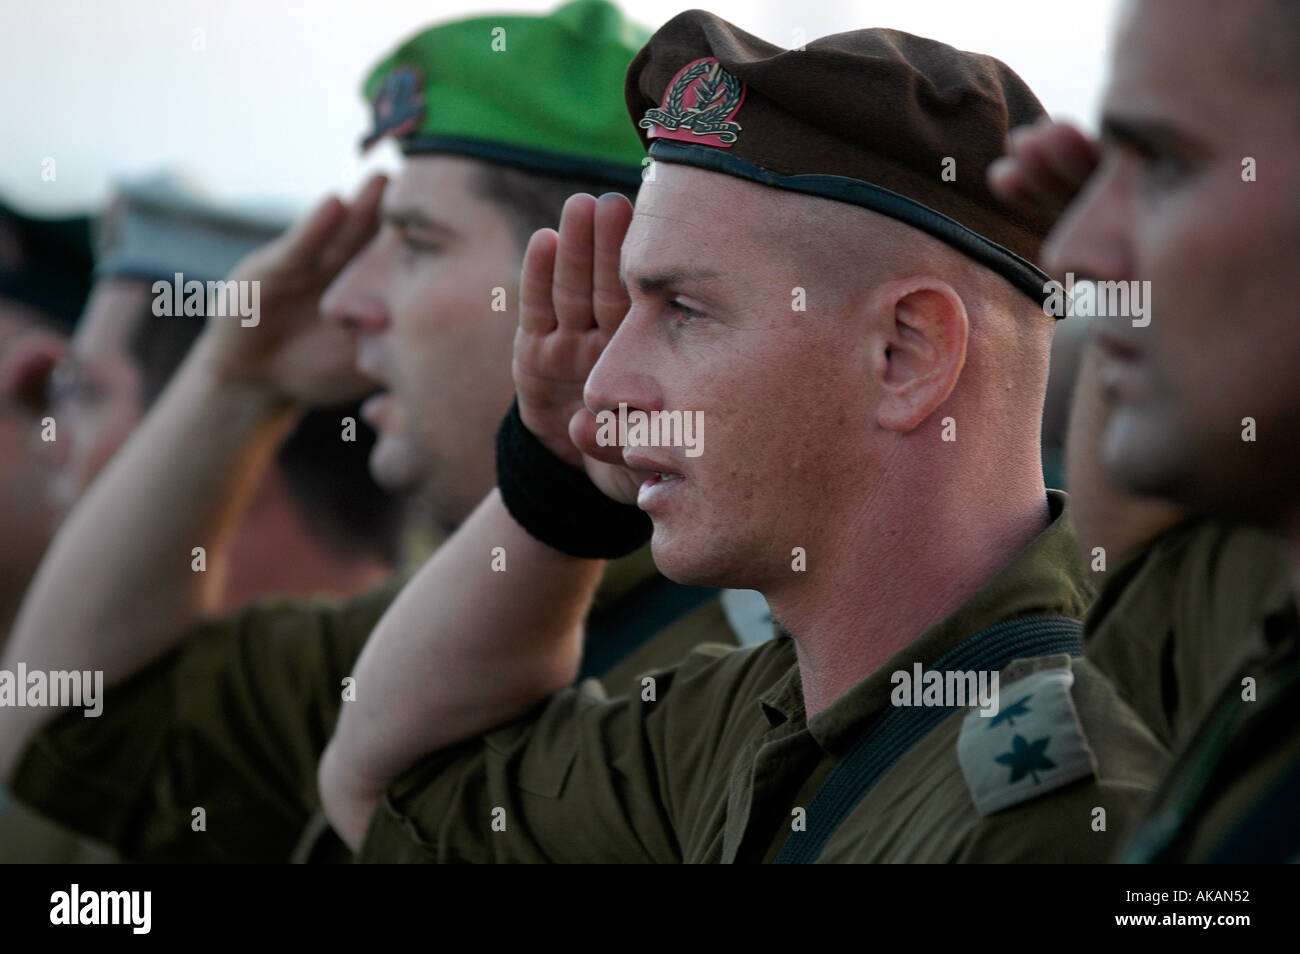 IDF Israeli commander from the 'Golani' rank unit salutes during military ceremony in Israel Stock Photo